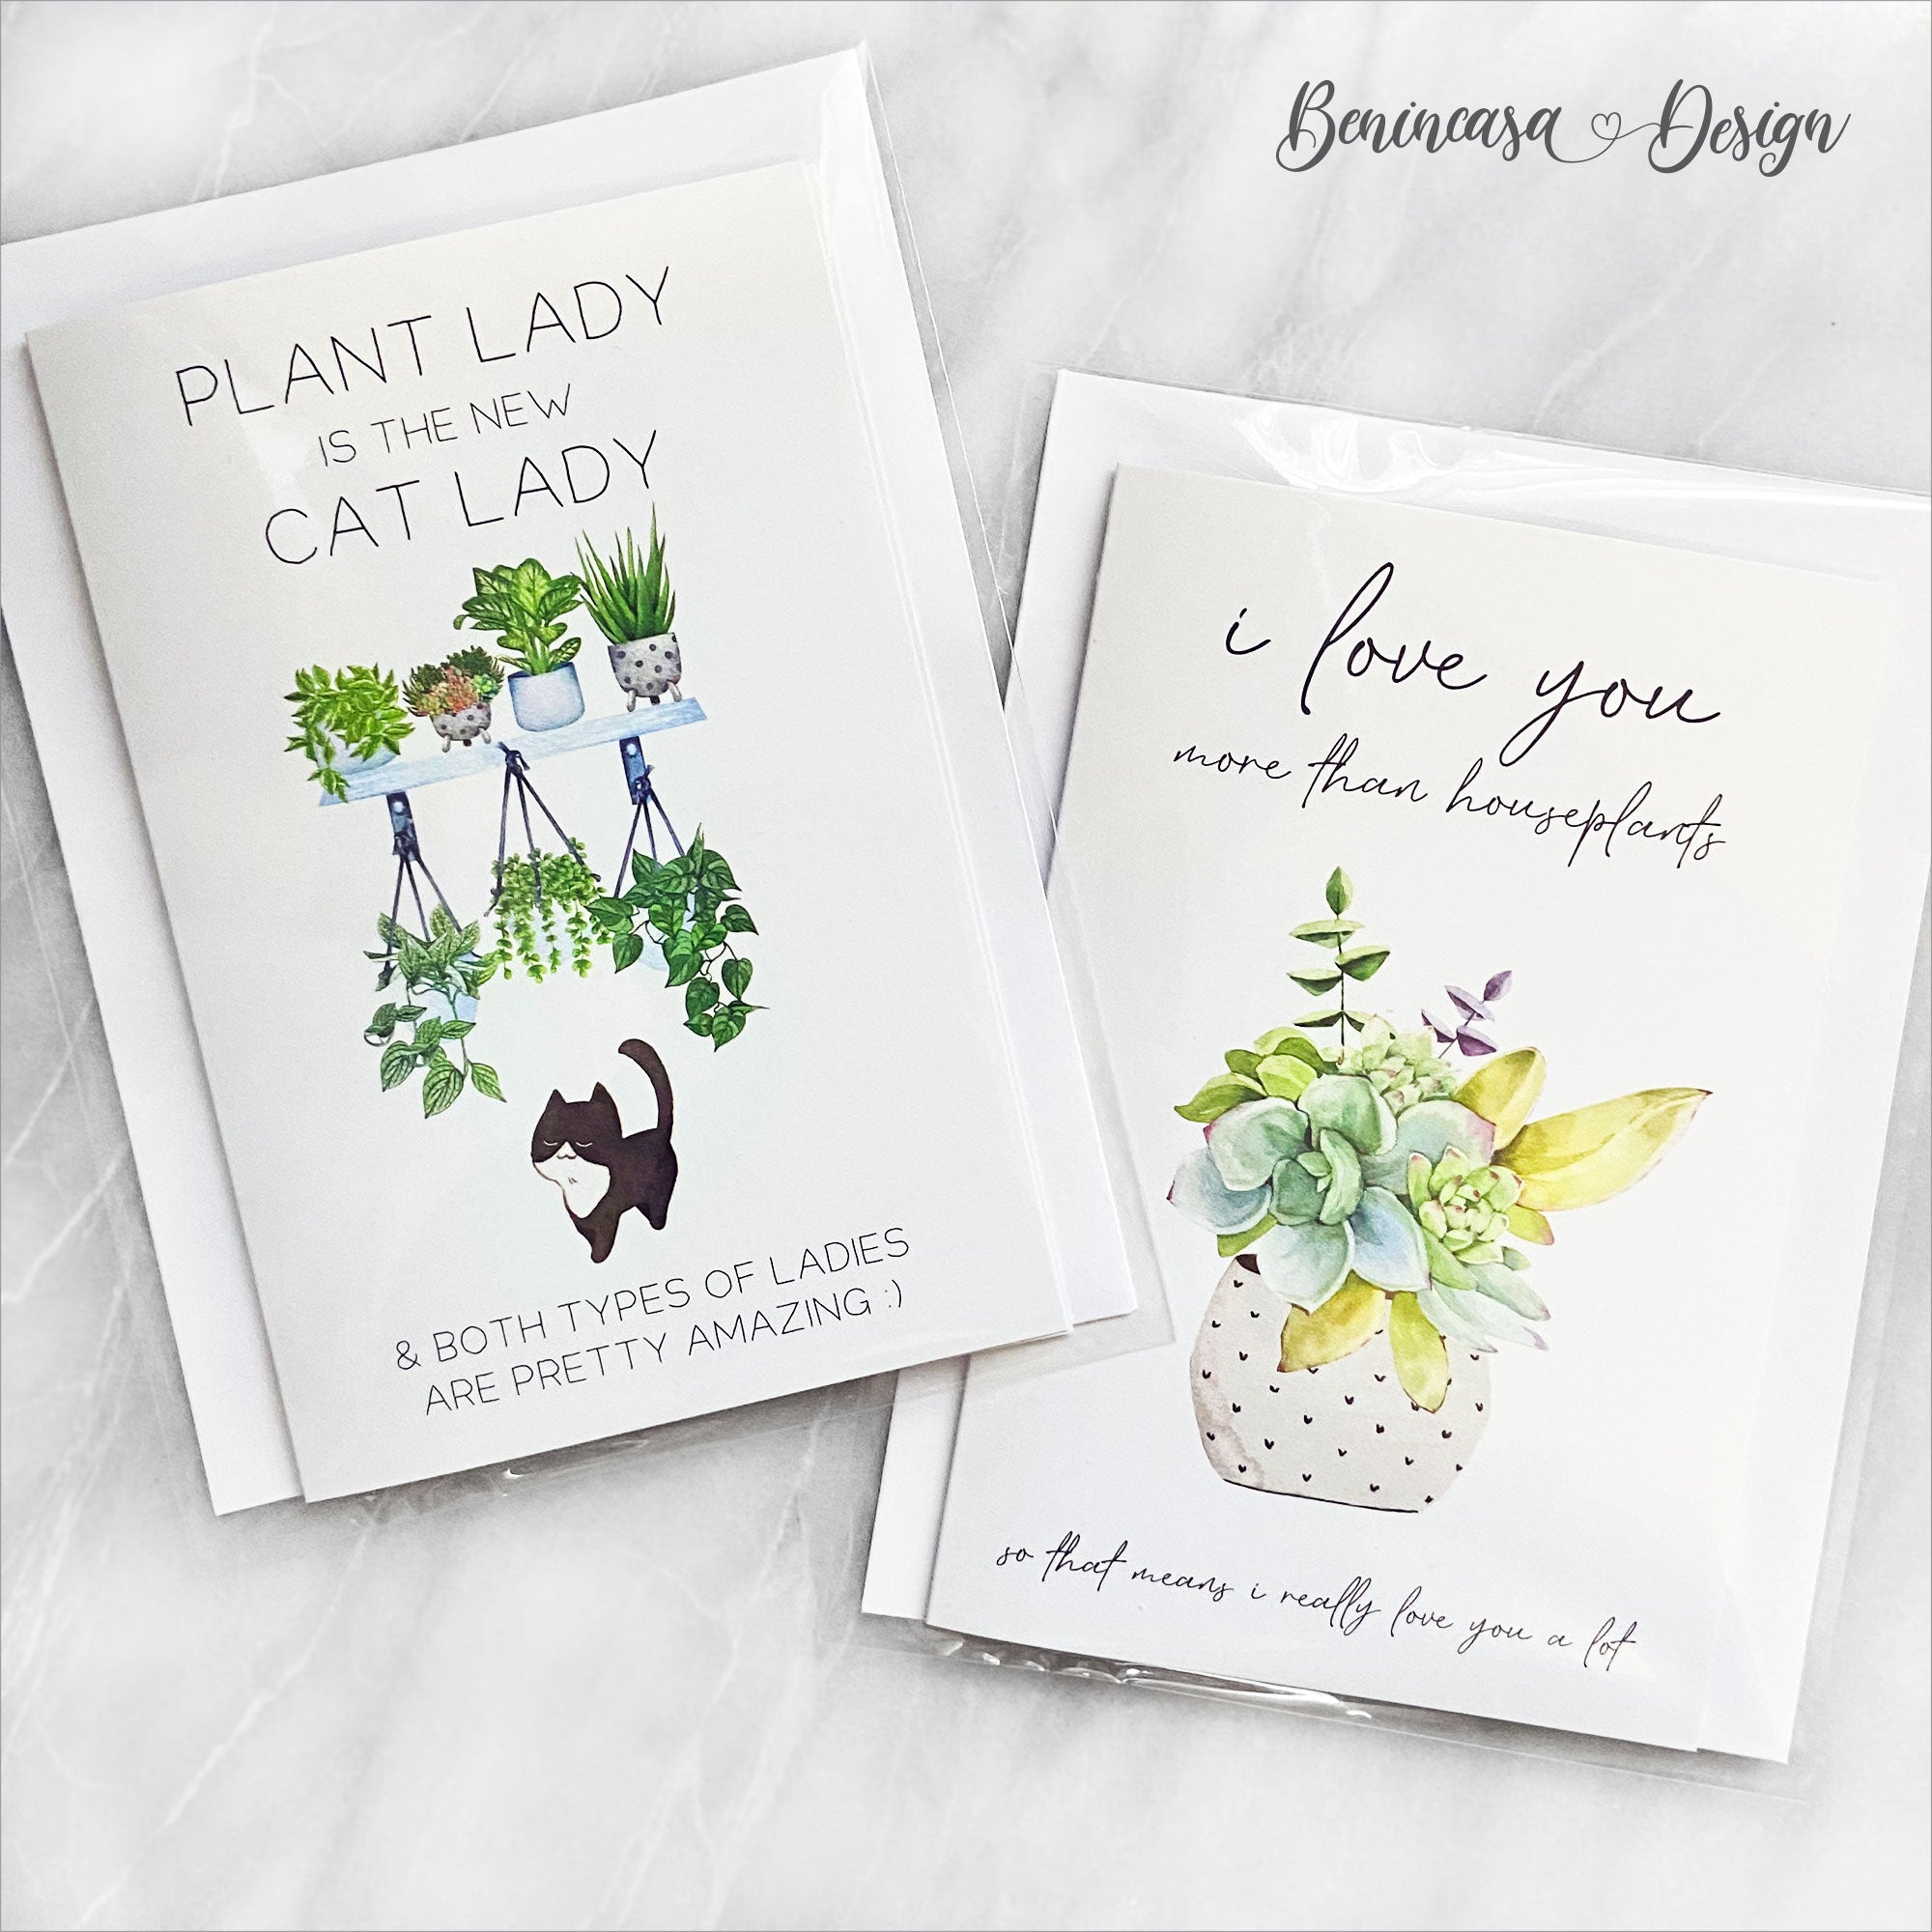 "Plant Lady is the new Cat Lady" Greeting Card